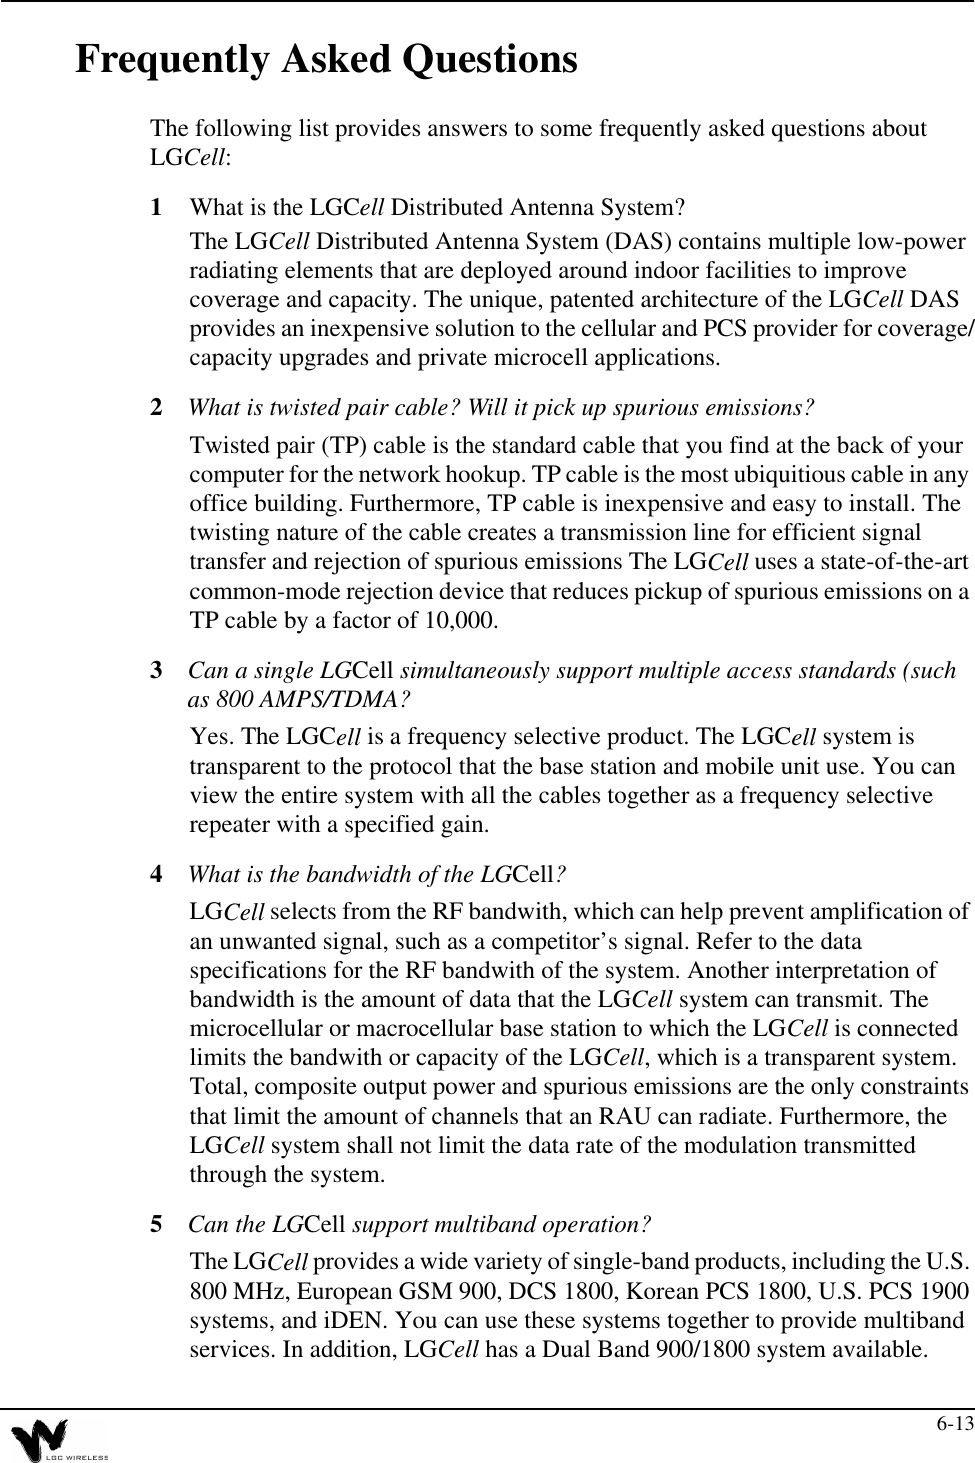 6-13Frequently Asked QuestionsThe following list provides answers to some frequently asked questions about LGCell:1What is the LGCell Distributed Antenna System?The LGCell Distributed Antenna System (DAS) contains multiple low-power radiating elements that are deployed around indoor facilities to improve coverage and capacity. The unique, patented architecture of the LGCell DAS provides an inexpensive solution to the cellular and PCS provider for coverage/capacity upgrades and private microcell applications.2What is twisted pair cable? Will it pick up spurious emissions?Twisted pair (TP) cable is the standard cable that you find at the back of your computer for the network hookup. TP cable is the most ubiquitious cable in any office building. Furthermore, TP cable is inexpensive and easy to install. The twisting nature of the cable creates a transmission line for efficient signal transfer and rejection of spurious emissions The LGCell uses a state-of-the-art common-mode rejection device that reduces pickup of spurious emissions on a TP cable by a factor of 10,000.3Can a single LGCell simultaneously support multiple access standards (such as 800 AMPS/TDMA?Yes. The LGCell is a frequency selective product. The LGCell system is transparent to the protocol that the base station and mobile unit use. You can view the entire system with all the cables together as a frequency selective repeater with a specified gain.4What is the bandwidth of the LGCell?LGCell selects from the RF bandwith, which can help prevent amplification of an unwanted signal, such as a competitor’s signal. Refer to the data specifications for the RF bandwith of the system. Another interpretation of bandwidth is the amount of data that the LGCell system can transmit. The microcellular or macrocellular base station to which the LGCell is connected limits the bandwith or capacity of the LGCell, which is a transparent system. Total, composite output power and spurious emissions are the only constraints that limit the amount of channels that an RAU can radiate. Furthermore, the LGCell system shall not limit the data rate of the modulation transmitted through the system.5Can the LGCell support multiband operation?The LGCell provides a wide variety of single-band products, including the U.S. 800 MHz, European GSM 900, DCS 1800, Korean PCS 1800, U.S. PCS 1900 systems, and iDEN. You can use these systems together to provide multiband services. In addition, LGCell has a Dual Band 900/1800 system available.